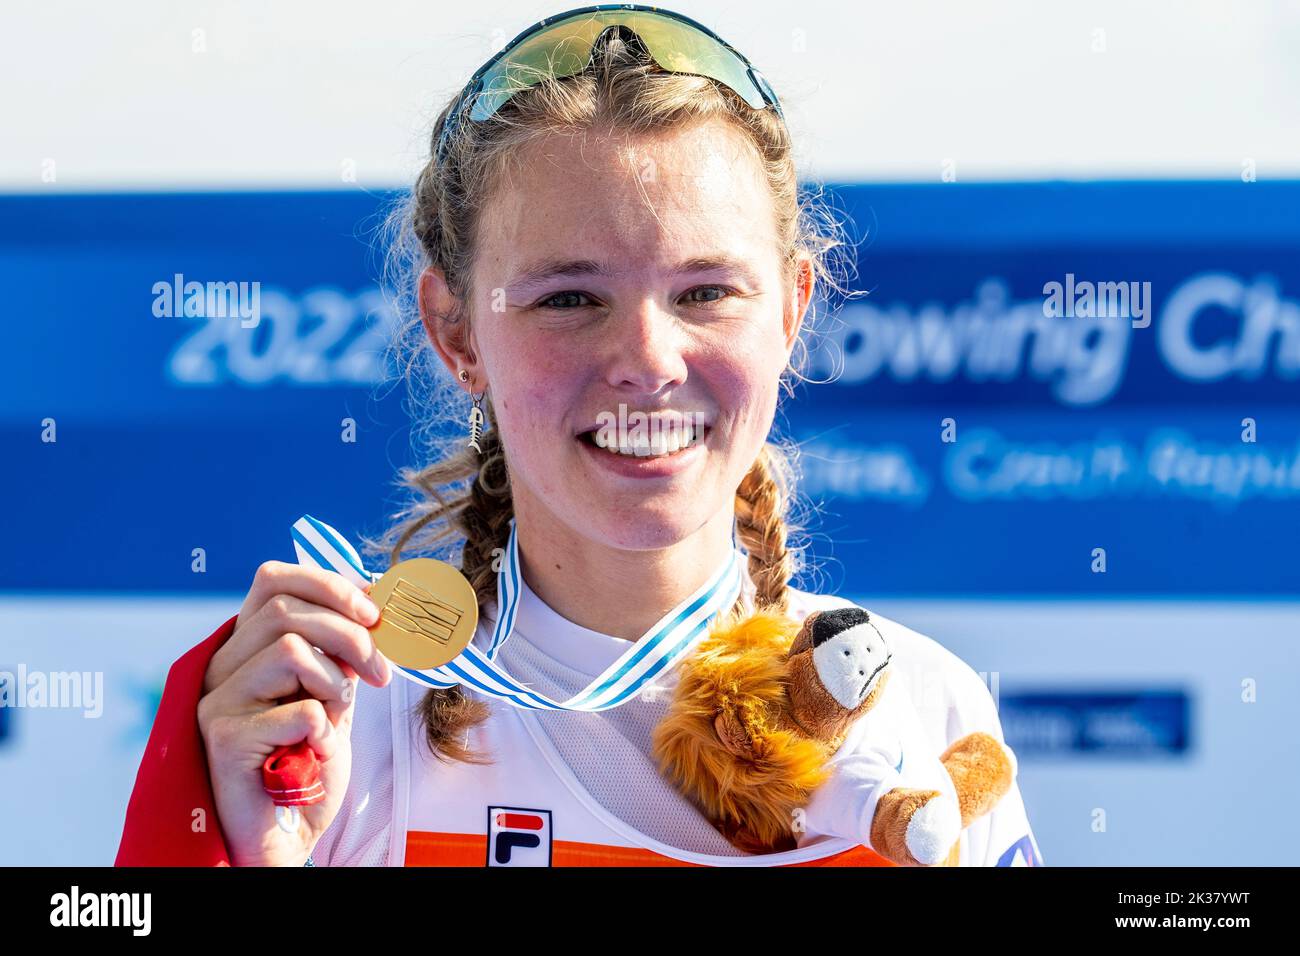 Racice, Czech Republic. 25th Sep, 2022. Karolien Florijn of Netherlands won the Women's Single Sculls Final A during Day 8 of the 2022 World Rowing Championships at the Labe Arena Racice on September 25, 2022 in Racice, Czech Republic. Credit: Ondrej Hajek/CTK Photo/Alamy Live News Stock Photo